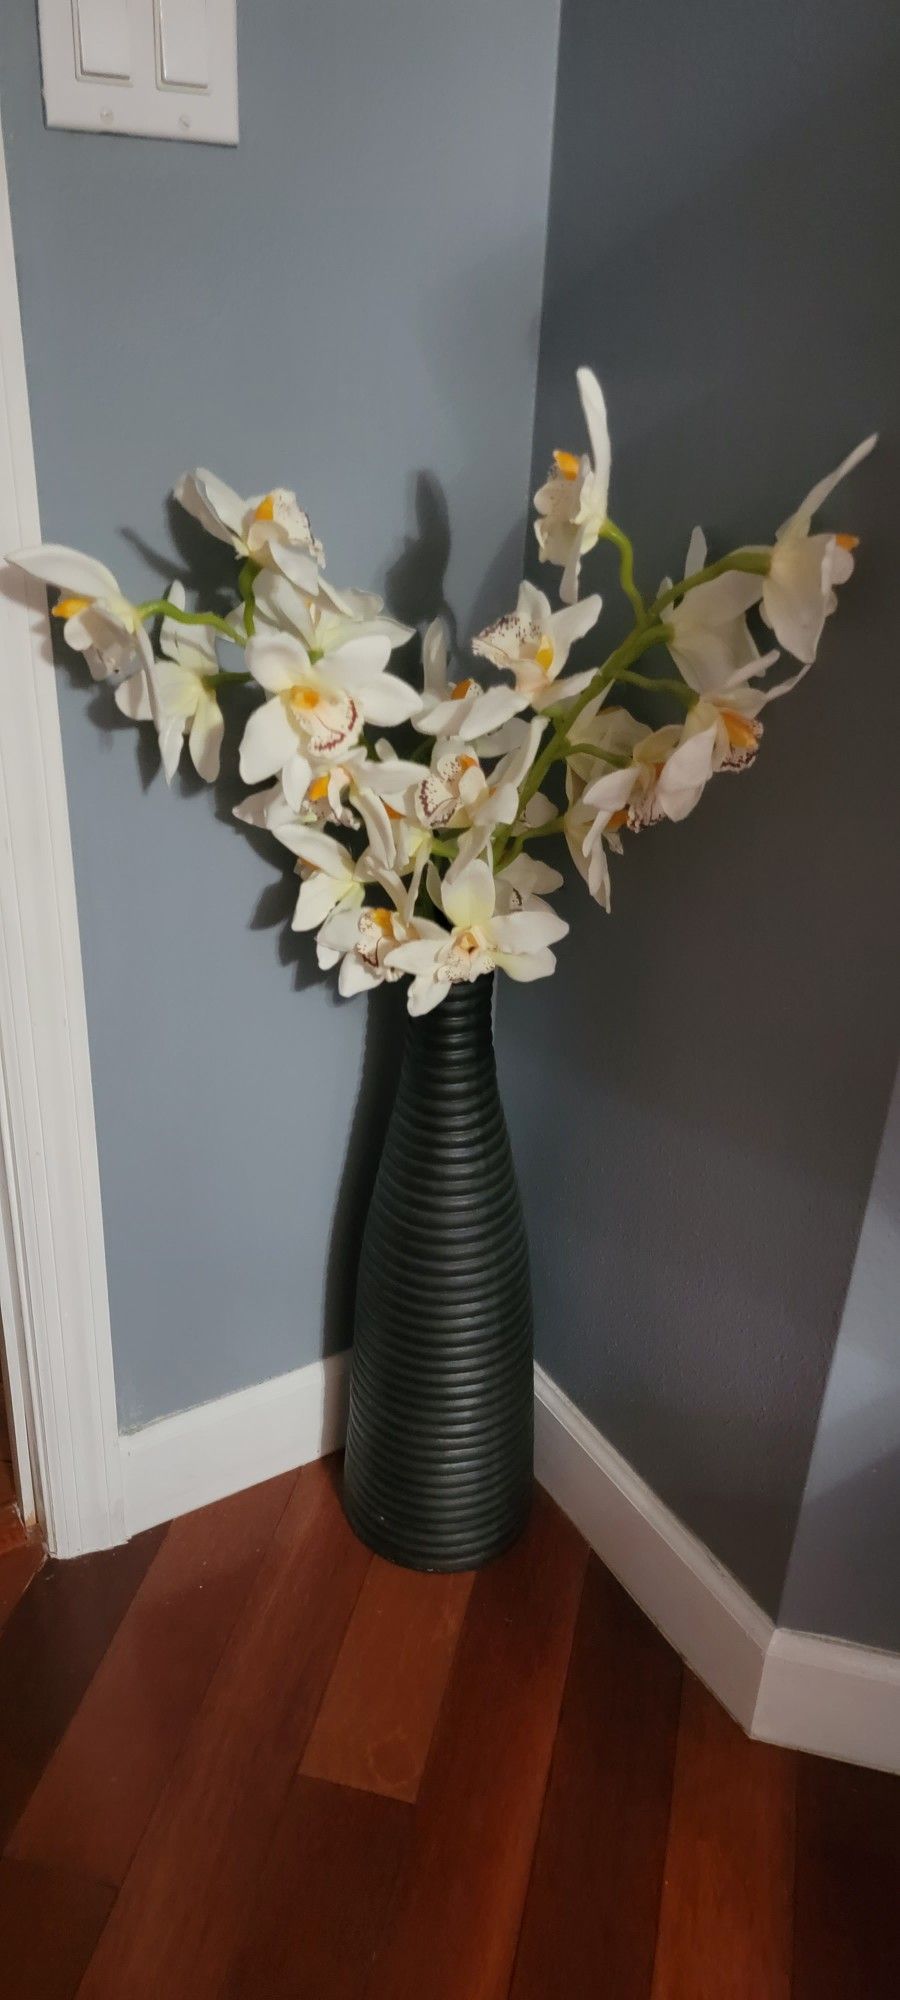 Ikea Vase With Artificial Flowers $10!!!